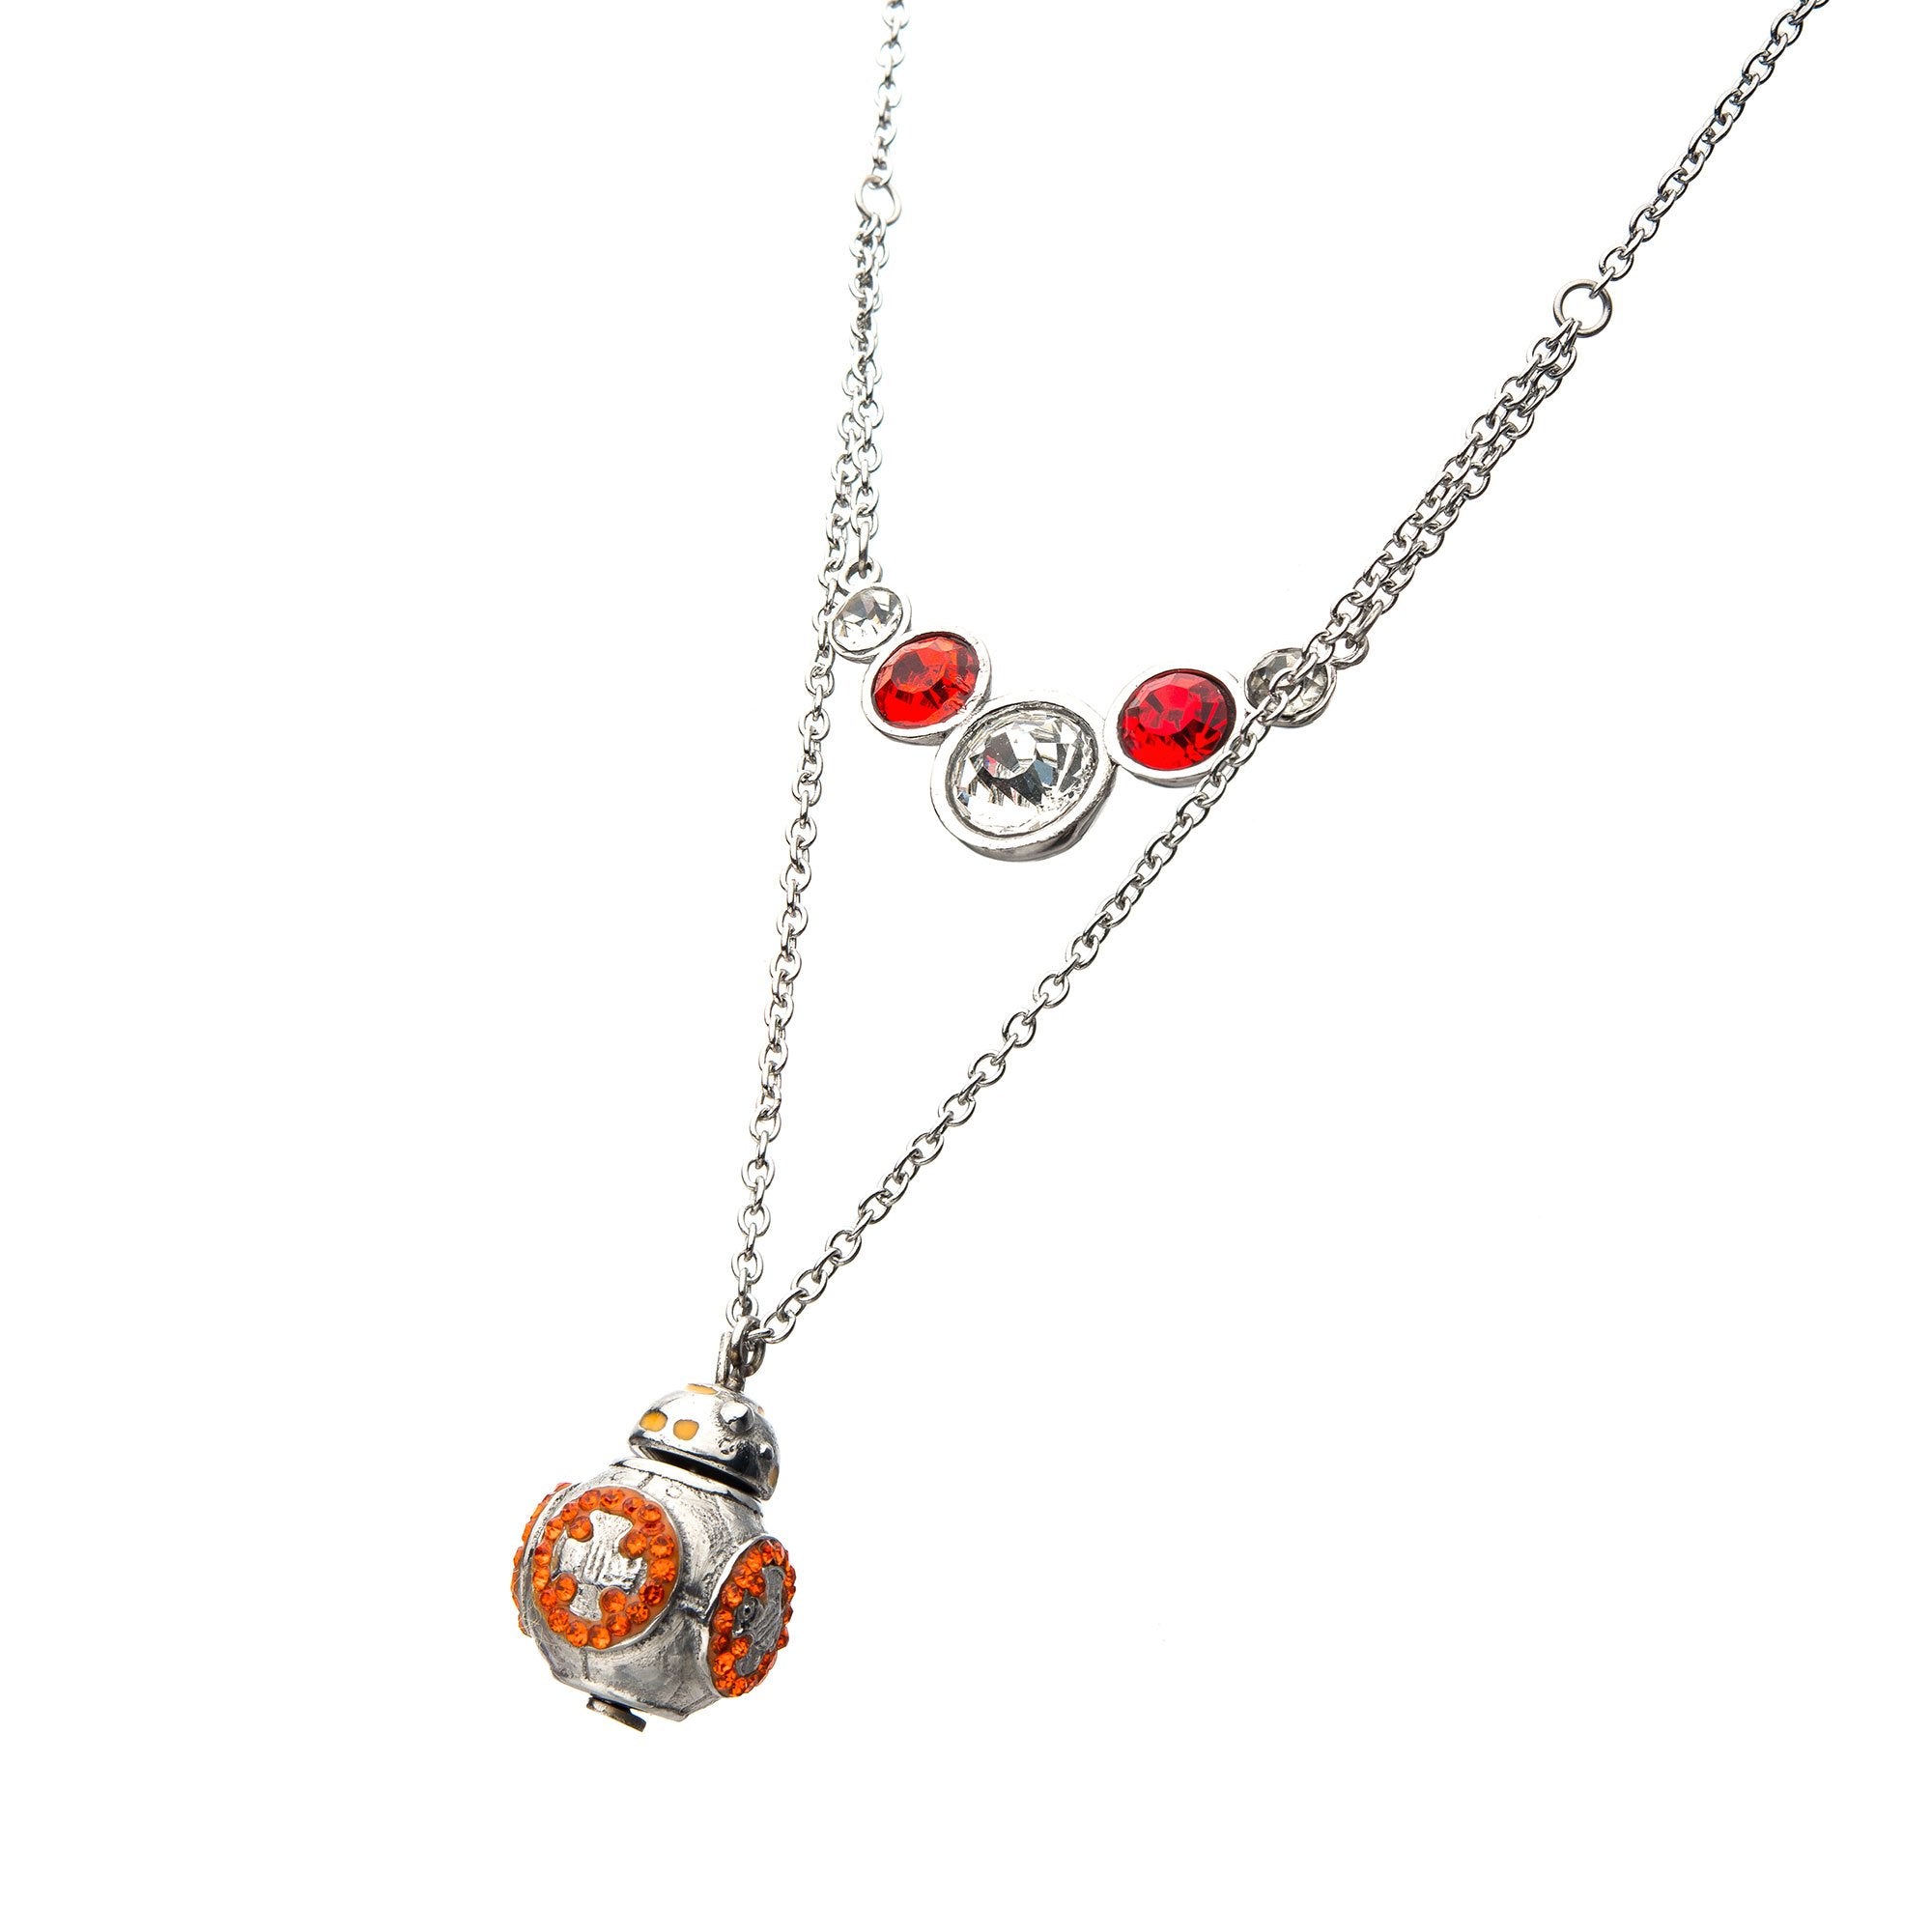 Star Wars Episode 9 BB-8 Tiered Pendant Necklace